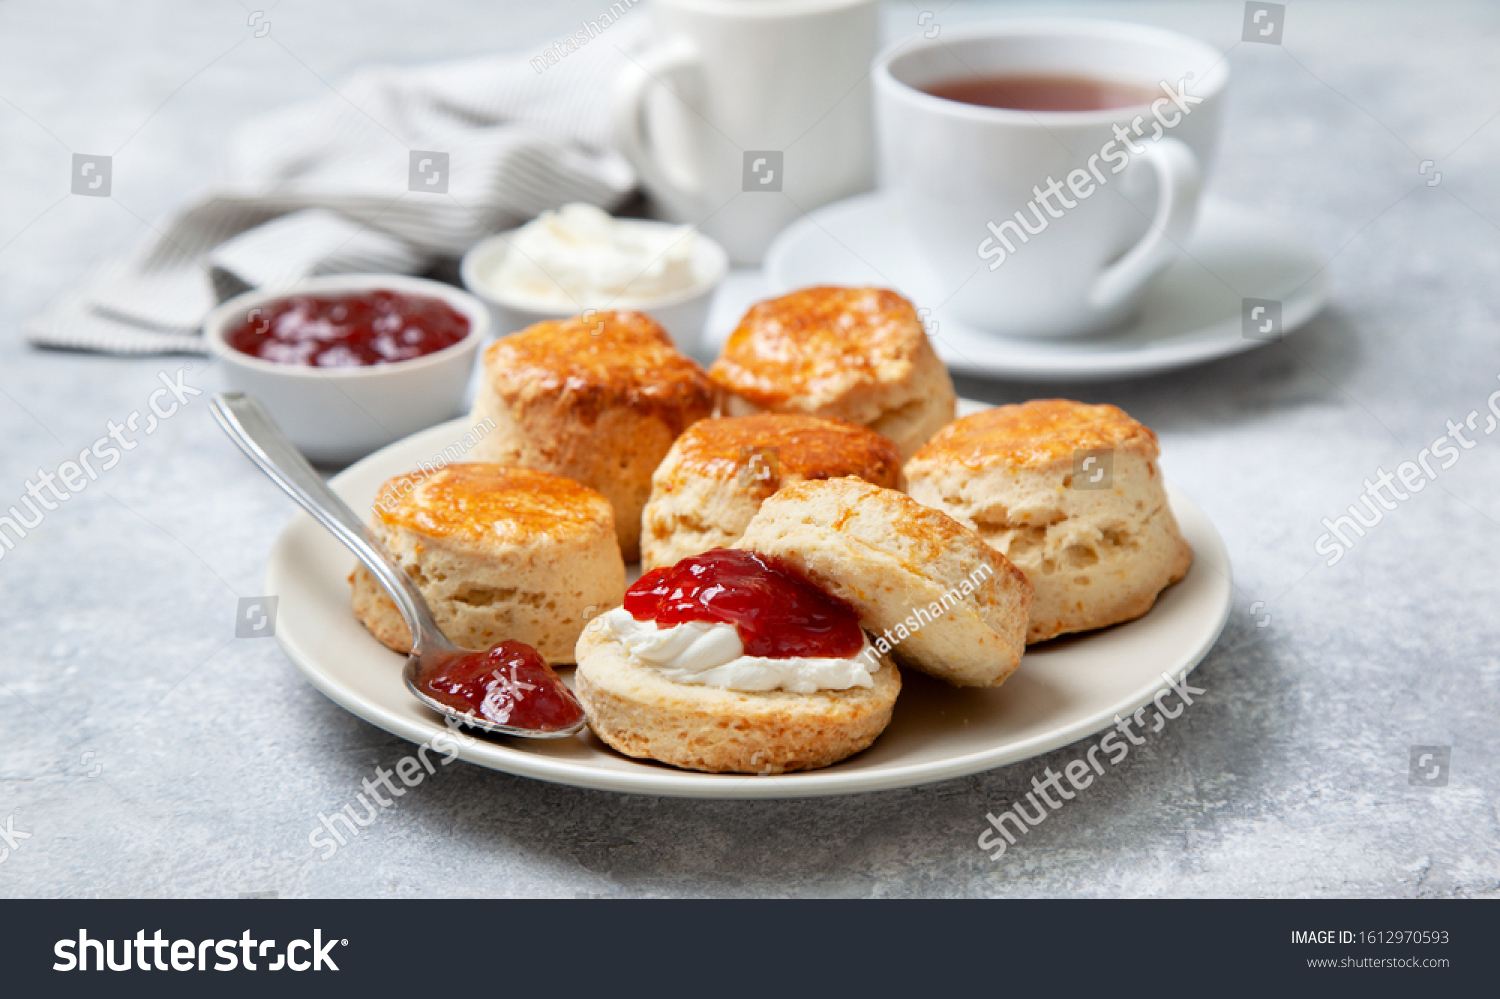 scones on a white plate, a jar of strawberry jam and a cup of tea on a gray background #1612970593